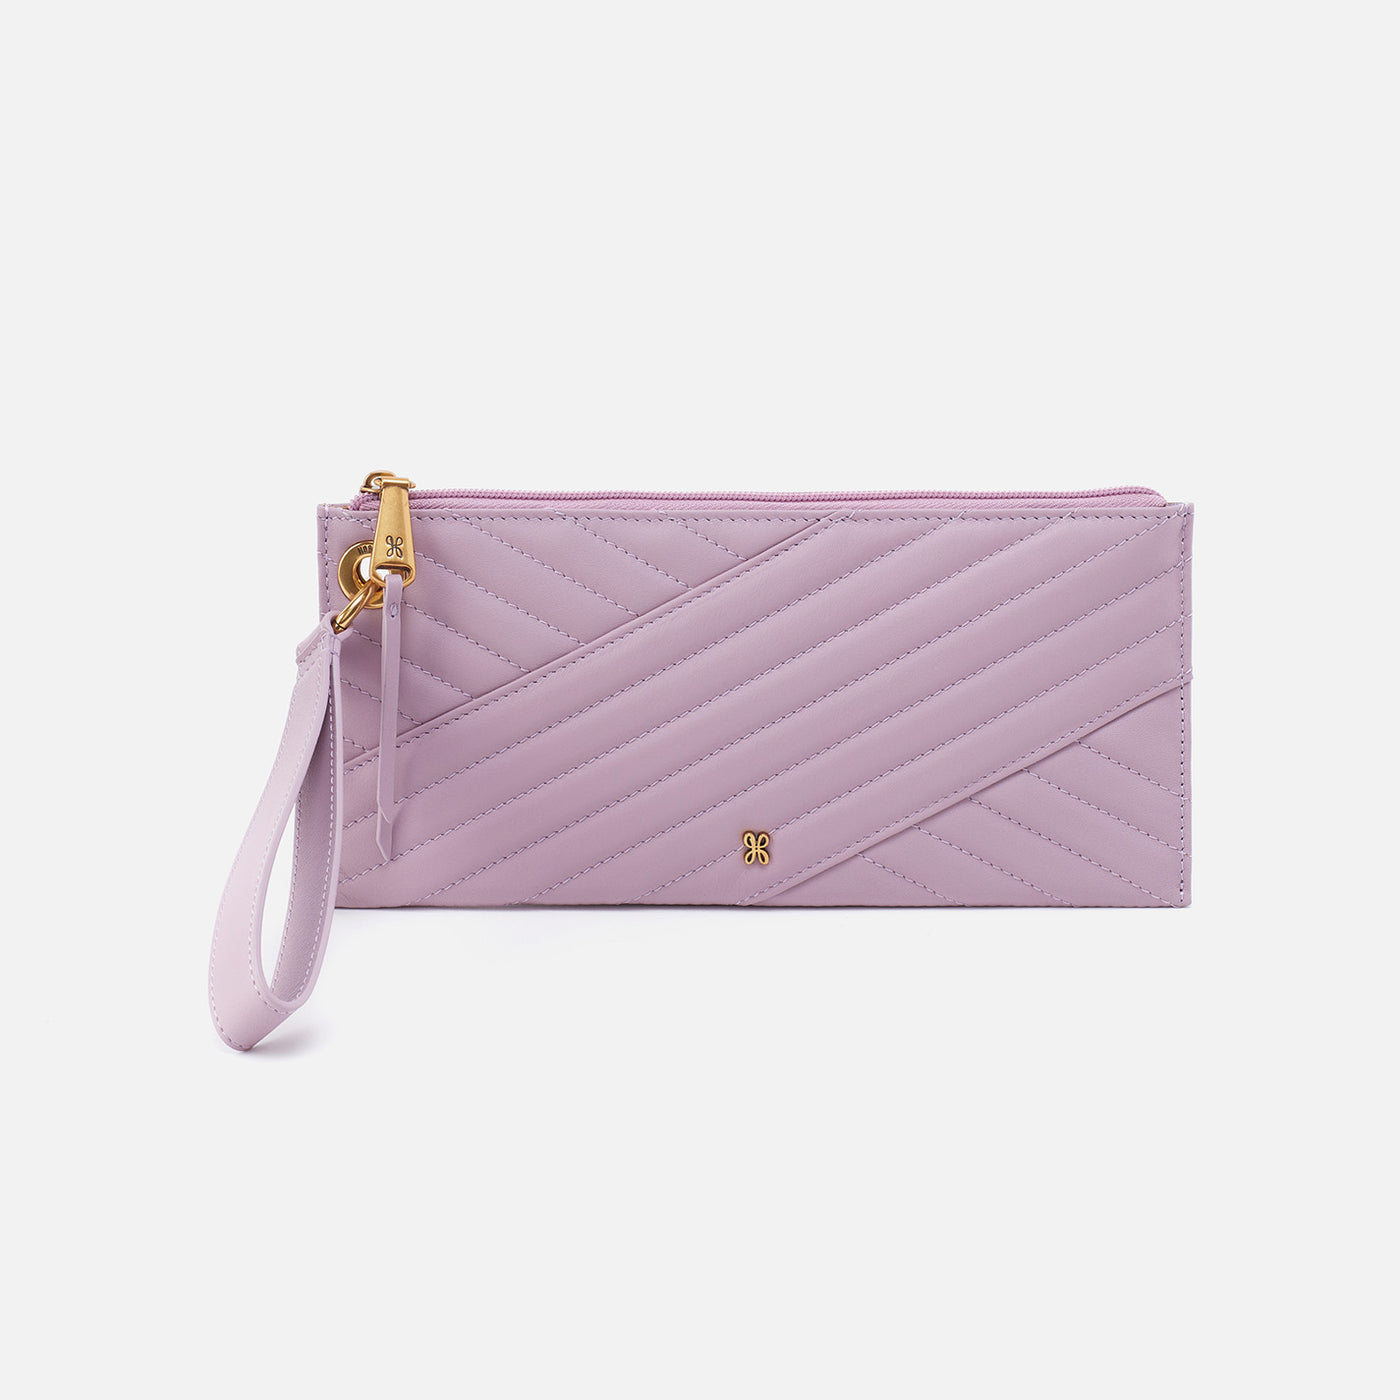 Vida Wristlet in Quilted Silk Napa Leather - Lavender